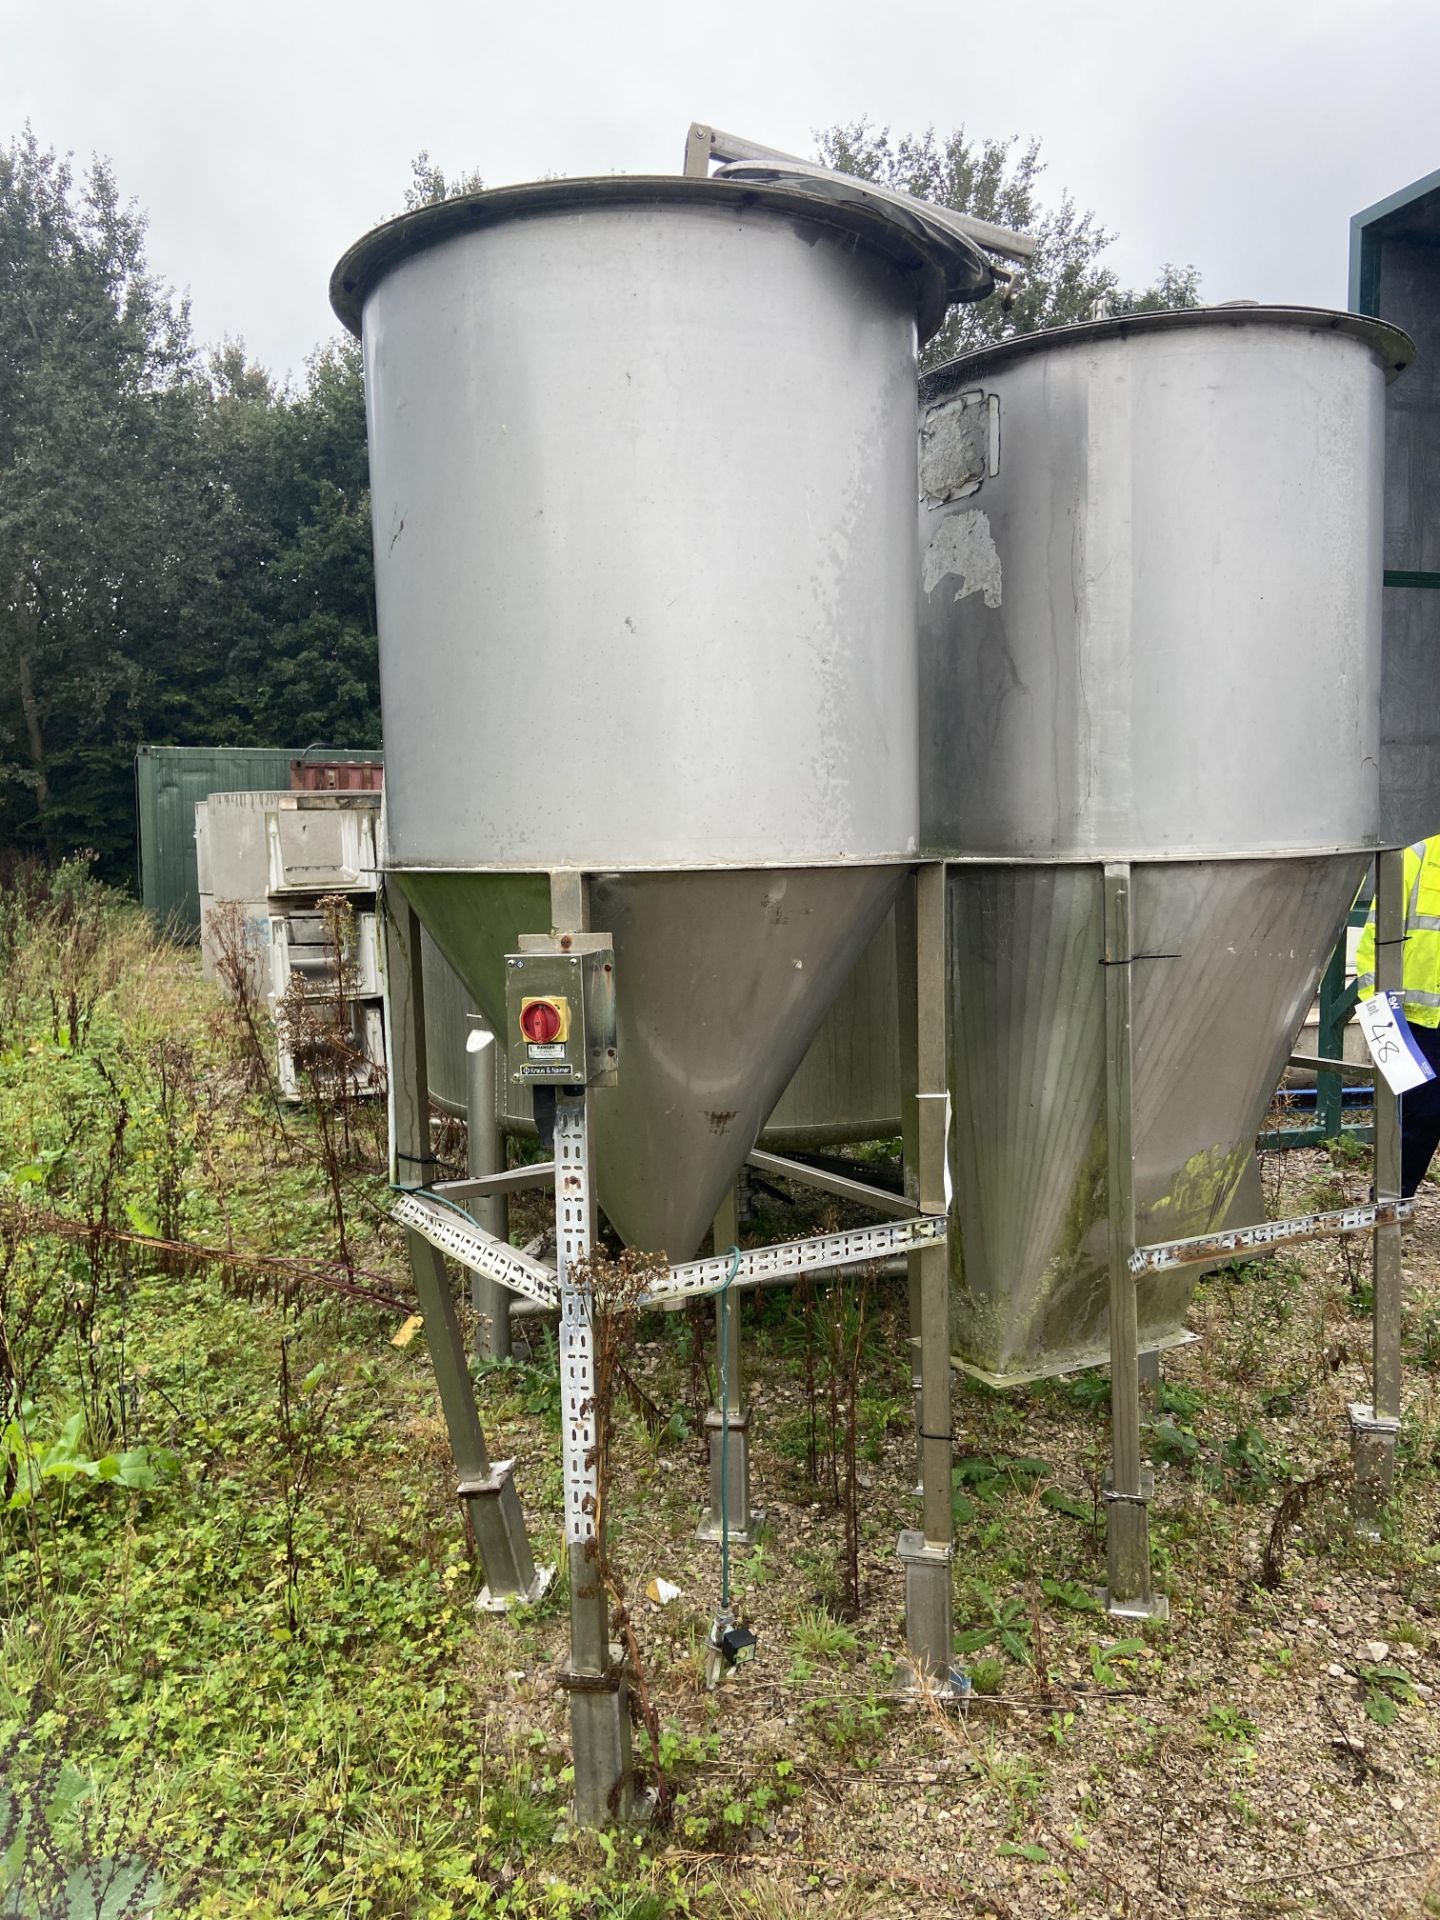 Stainless Steel Tank/ Hopper, approx. 2.5m x 1m dia., on stainless steel fabricated legs. Lot